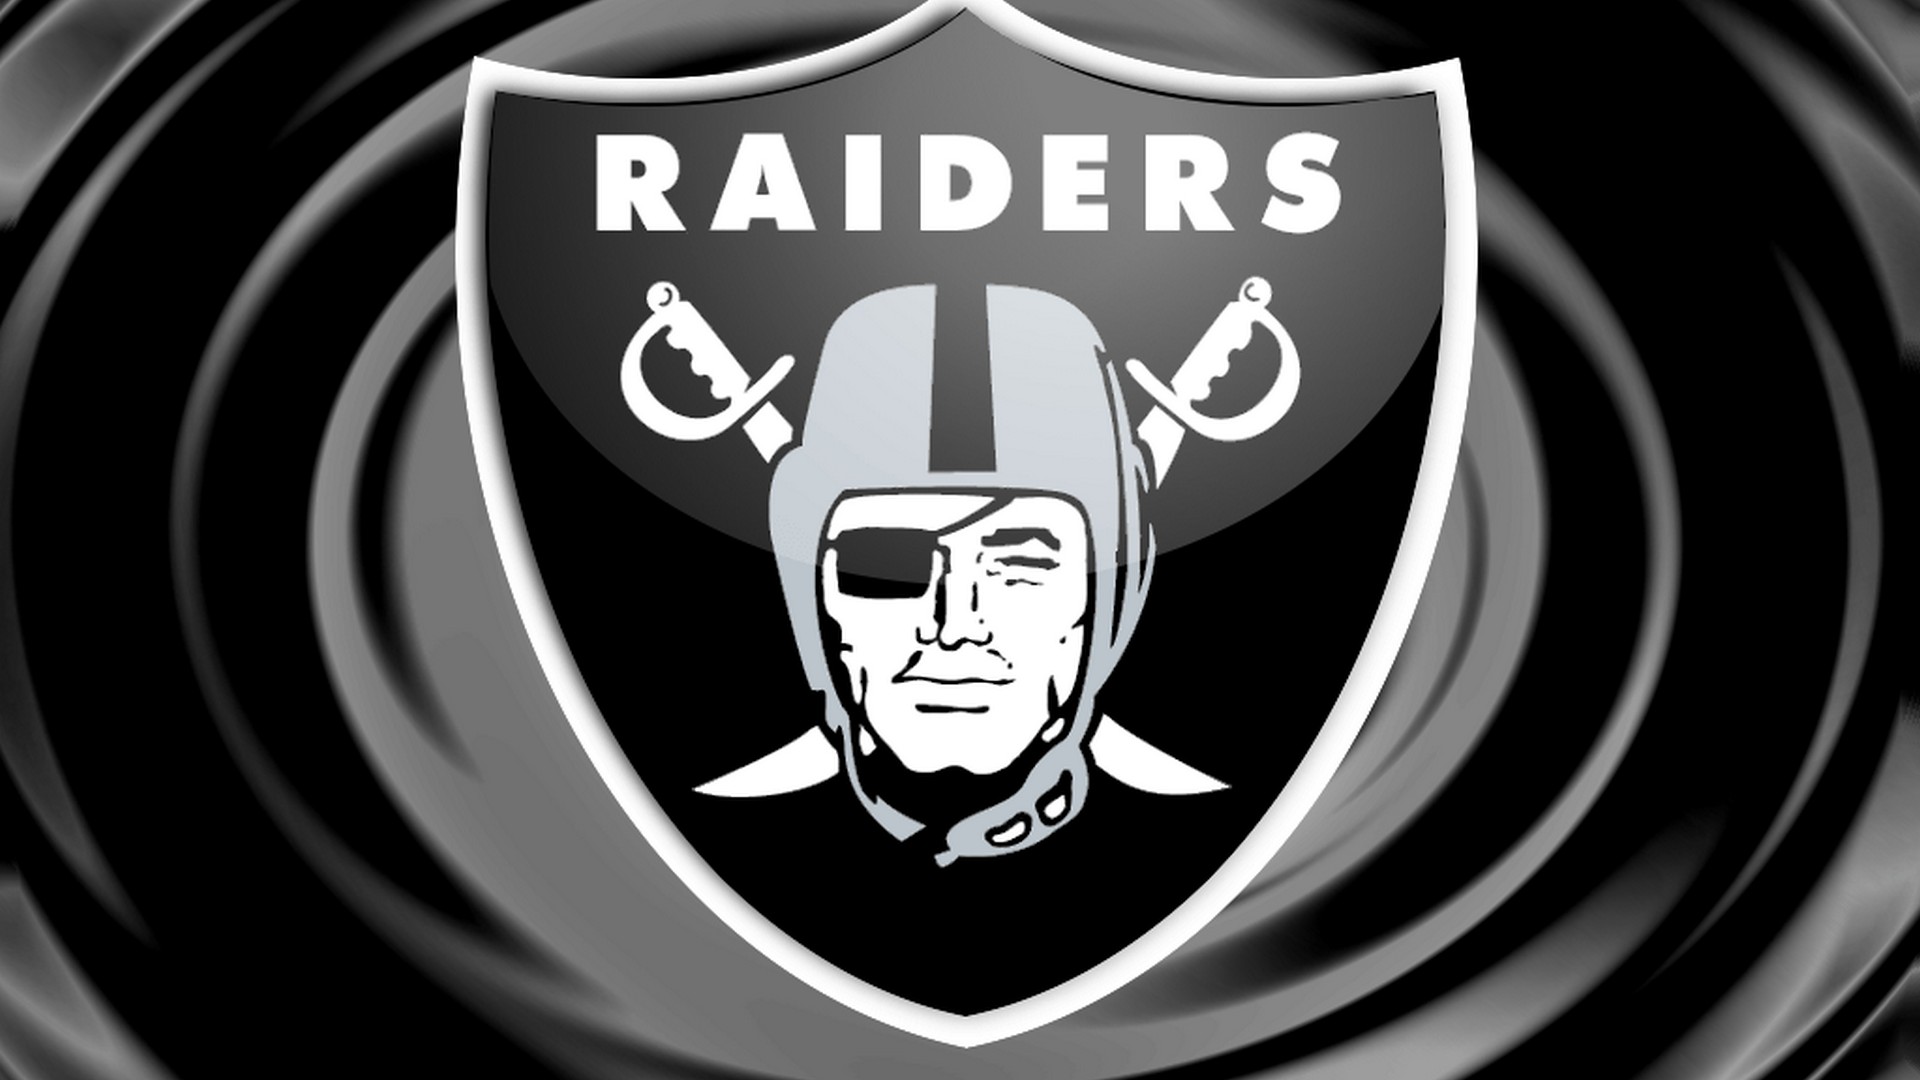 HD Desktop Wallpaper Oakland Raiders With high-resolution 1920X1080 pixel. You can use this wallpaper for your Mac or Windows Desktop Background, iPhone, Android or Tablet and another Smartphone device